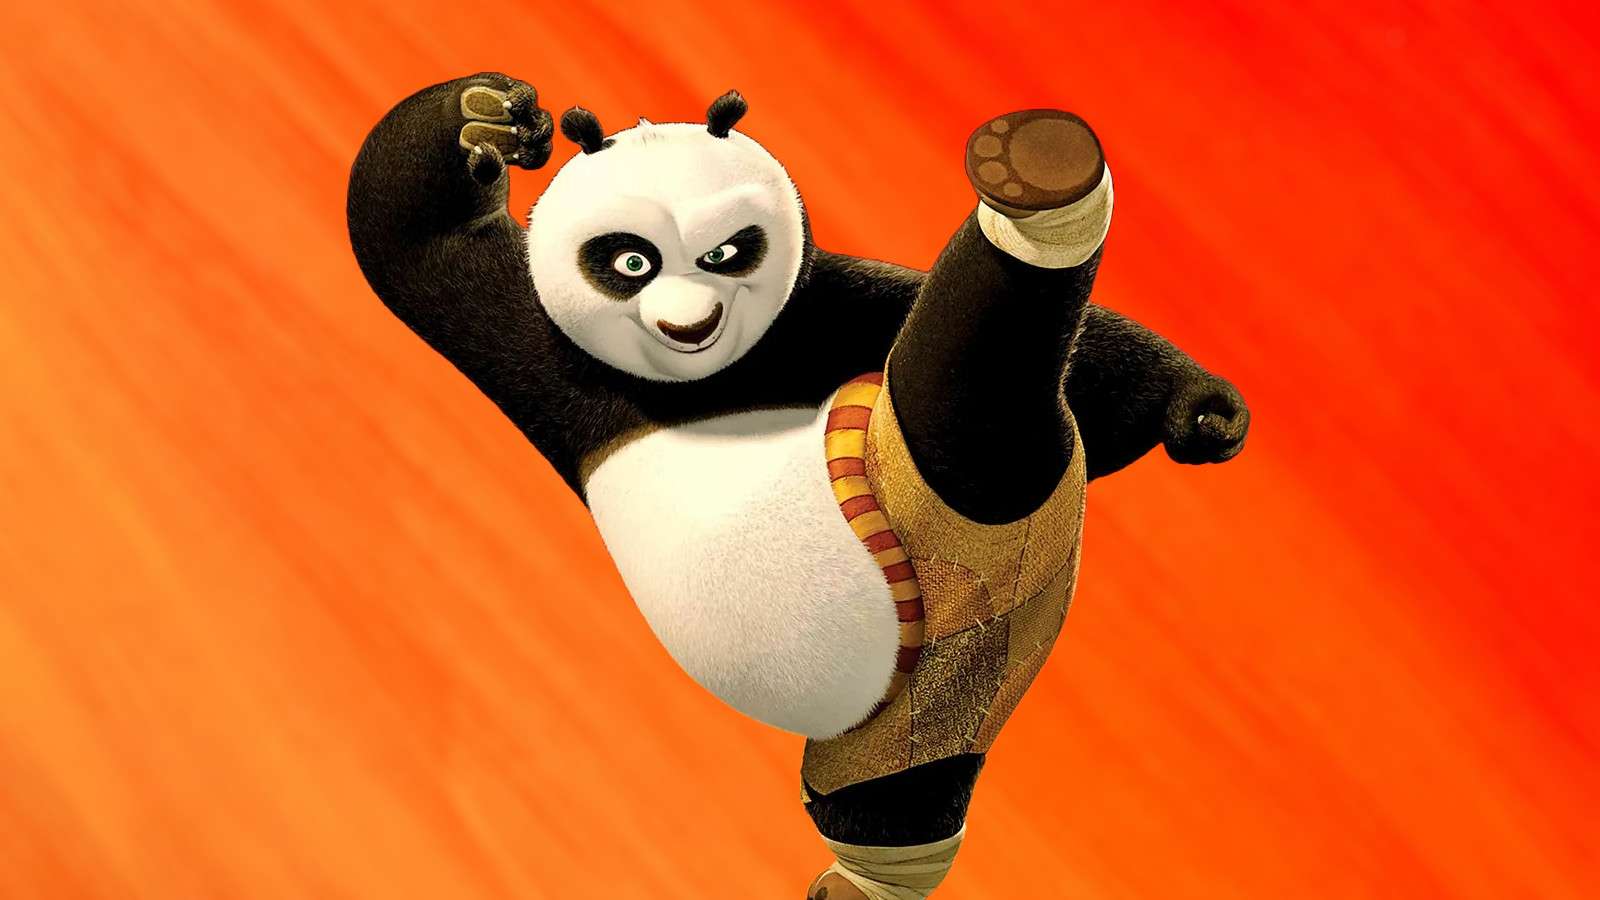 The best animated movies: Kung Fu Panda - Po striking a fighting pose against an orange background